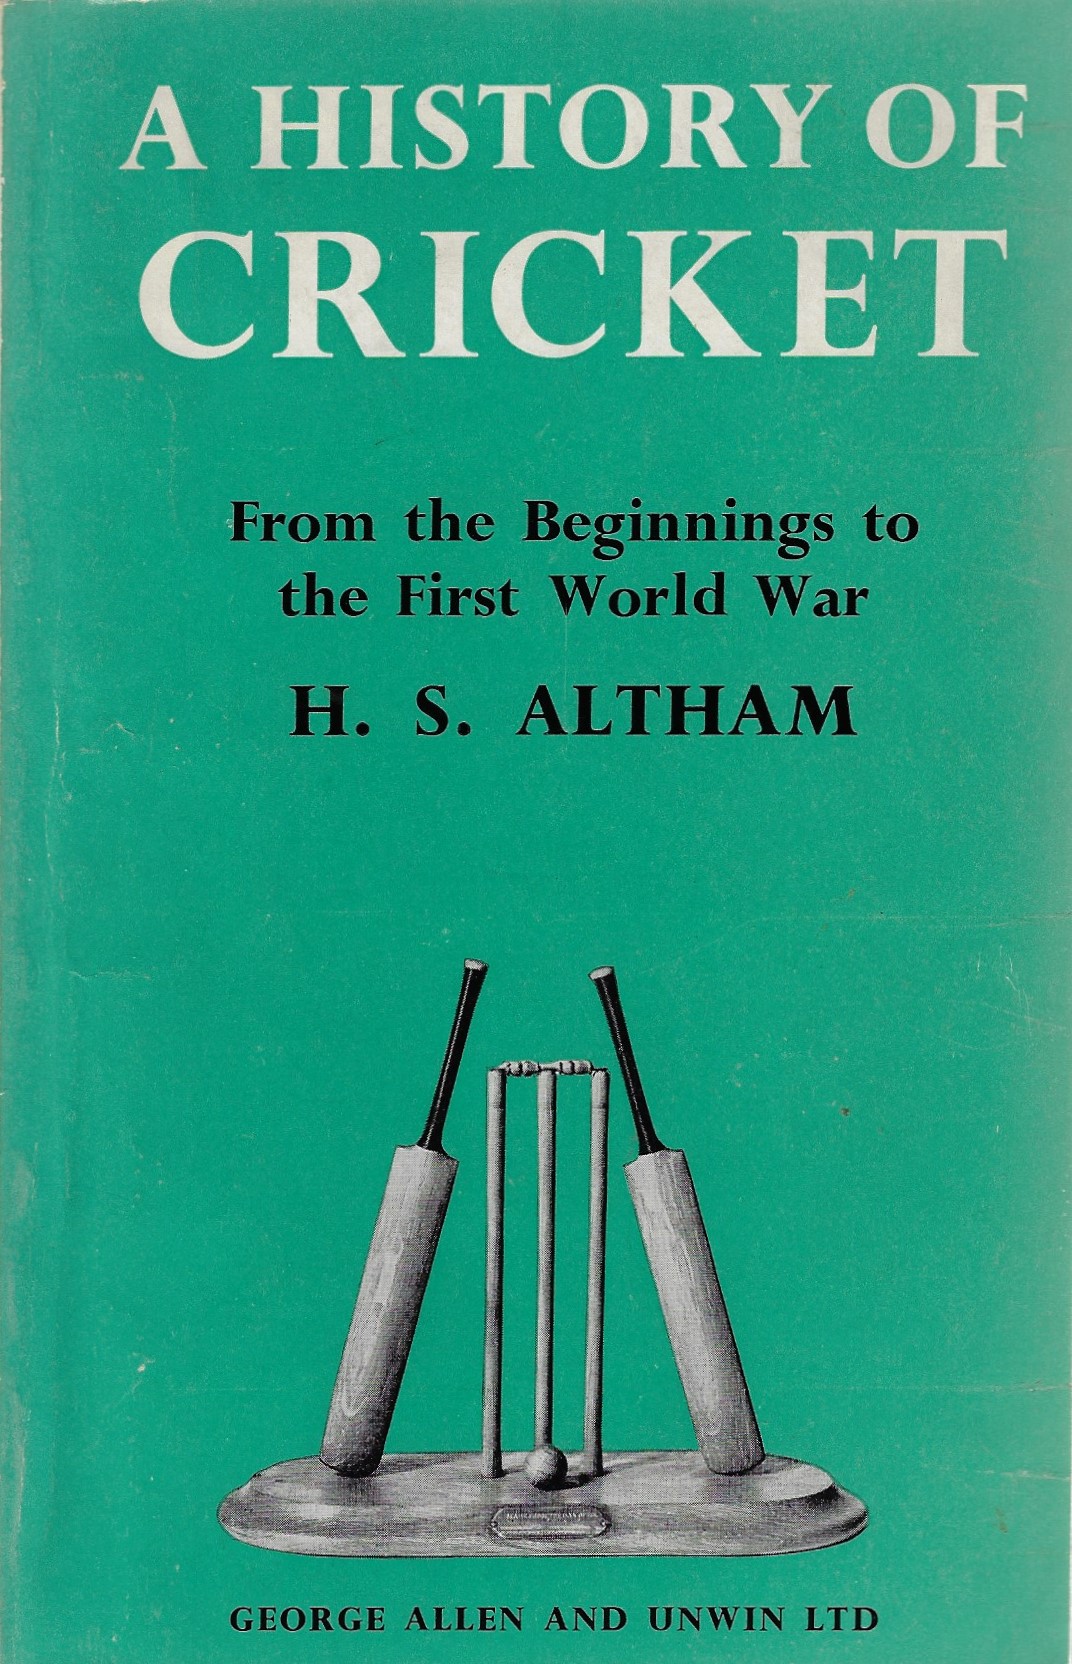 Altham, H.S. - A History of cricket Volume 1 -From the beginning to the First World War